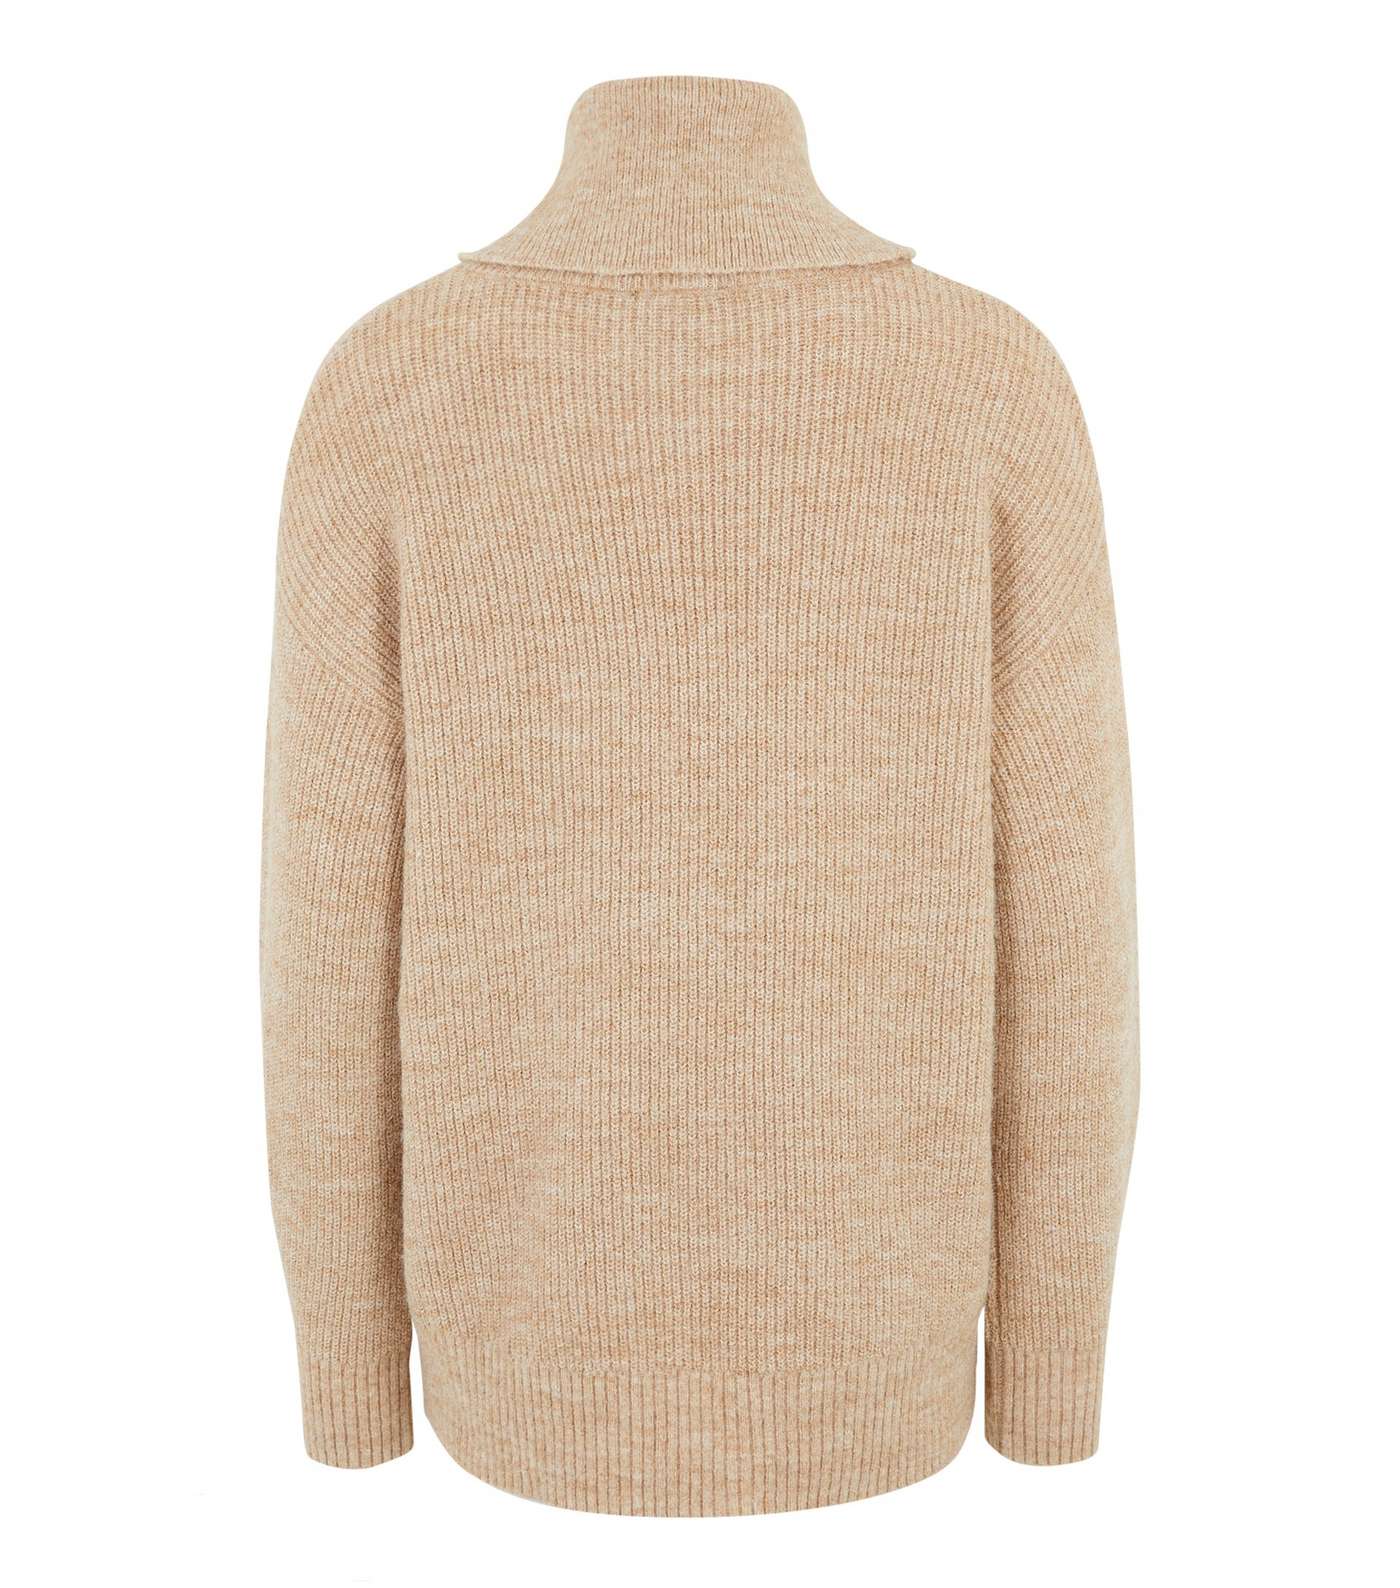 Camel Slouchy Roll Neck Jumper Image 2